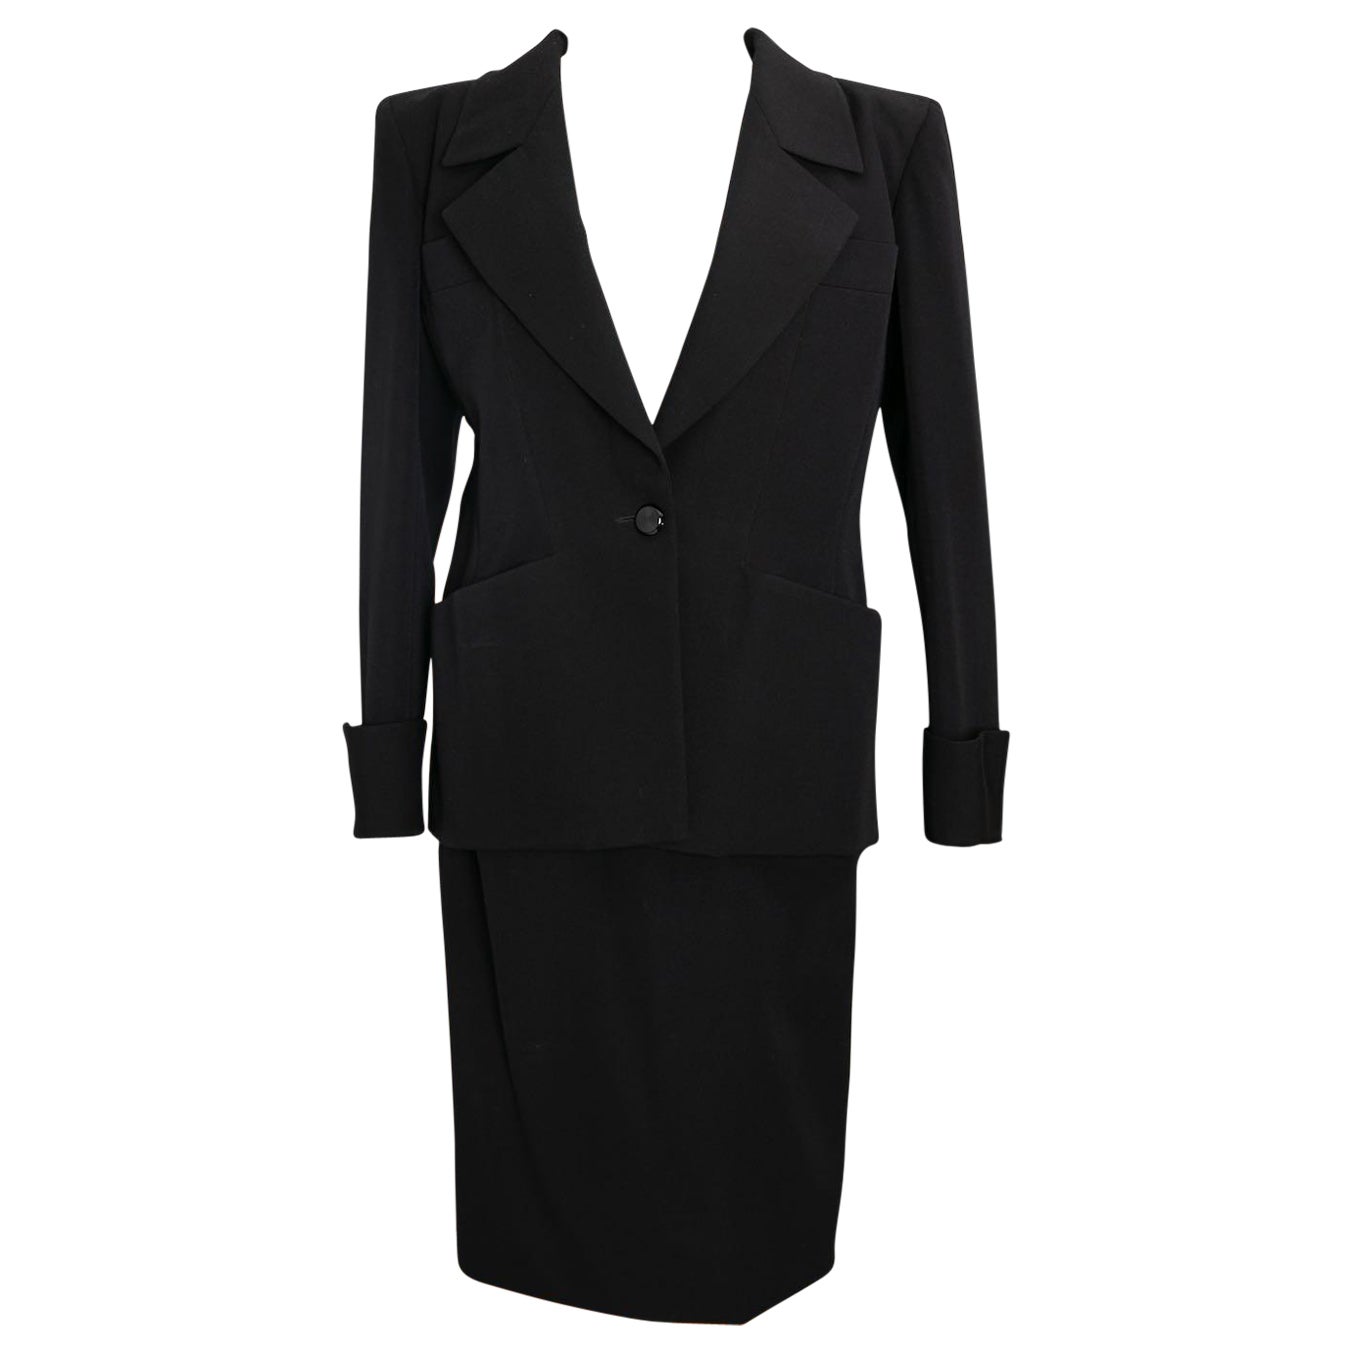 Yves Saint Laurent Haute Couture Black Skirt and Jacket Set, circa 1981/1982 For Sale